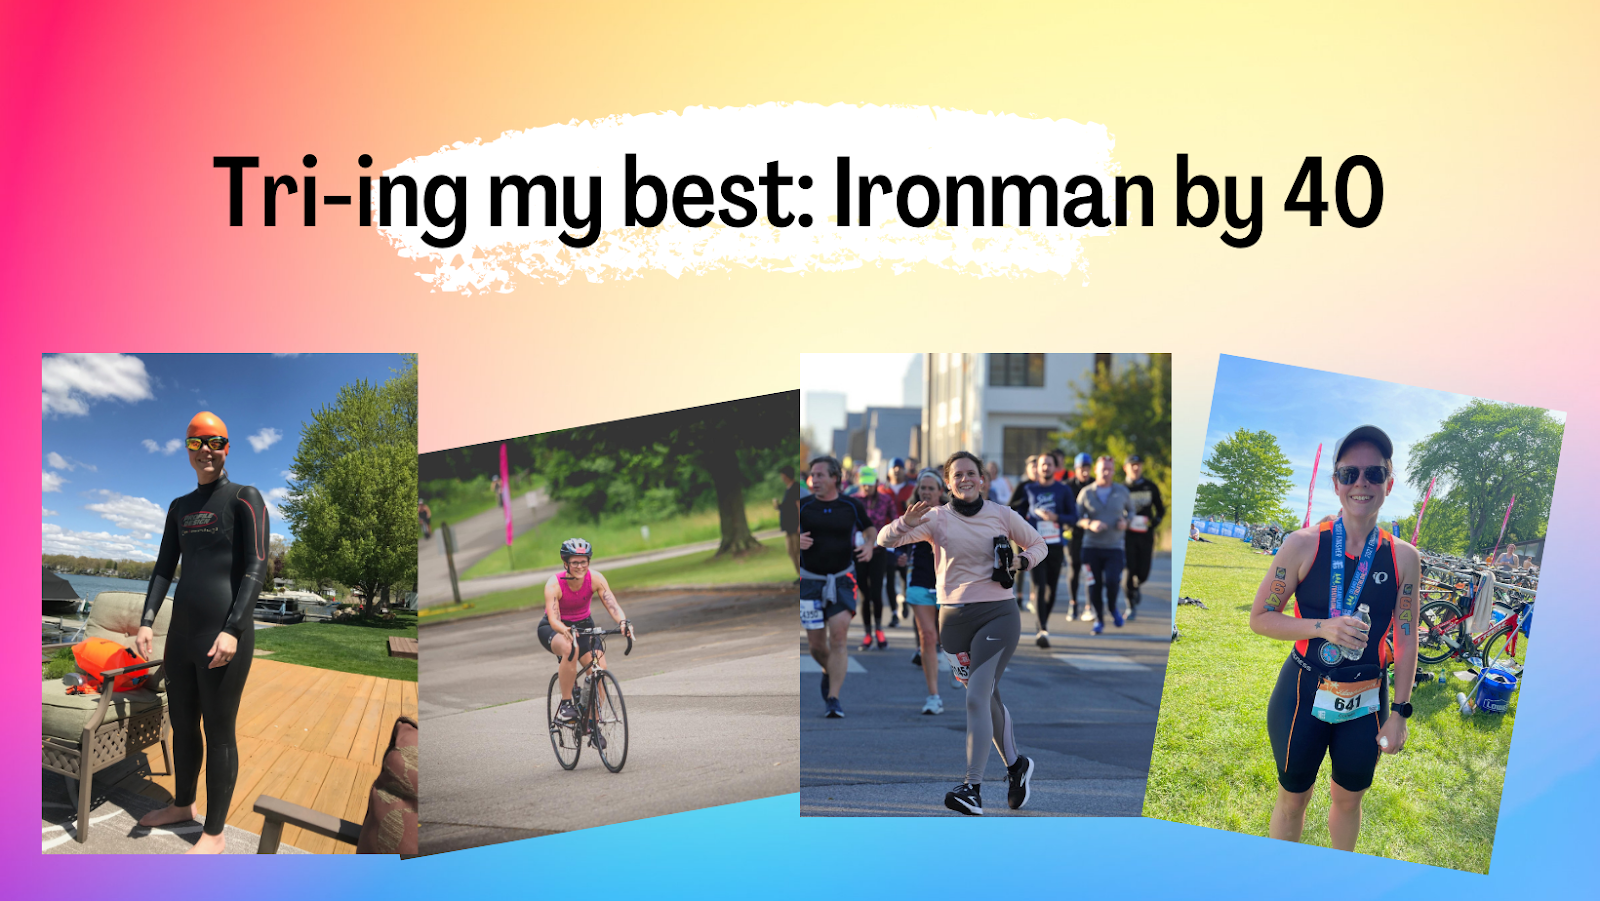 Tri-ing my best: Ironman by 40